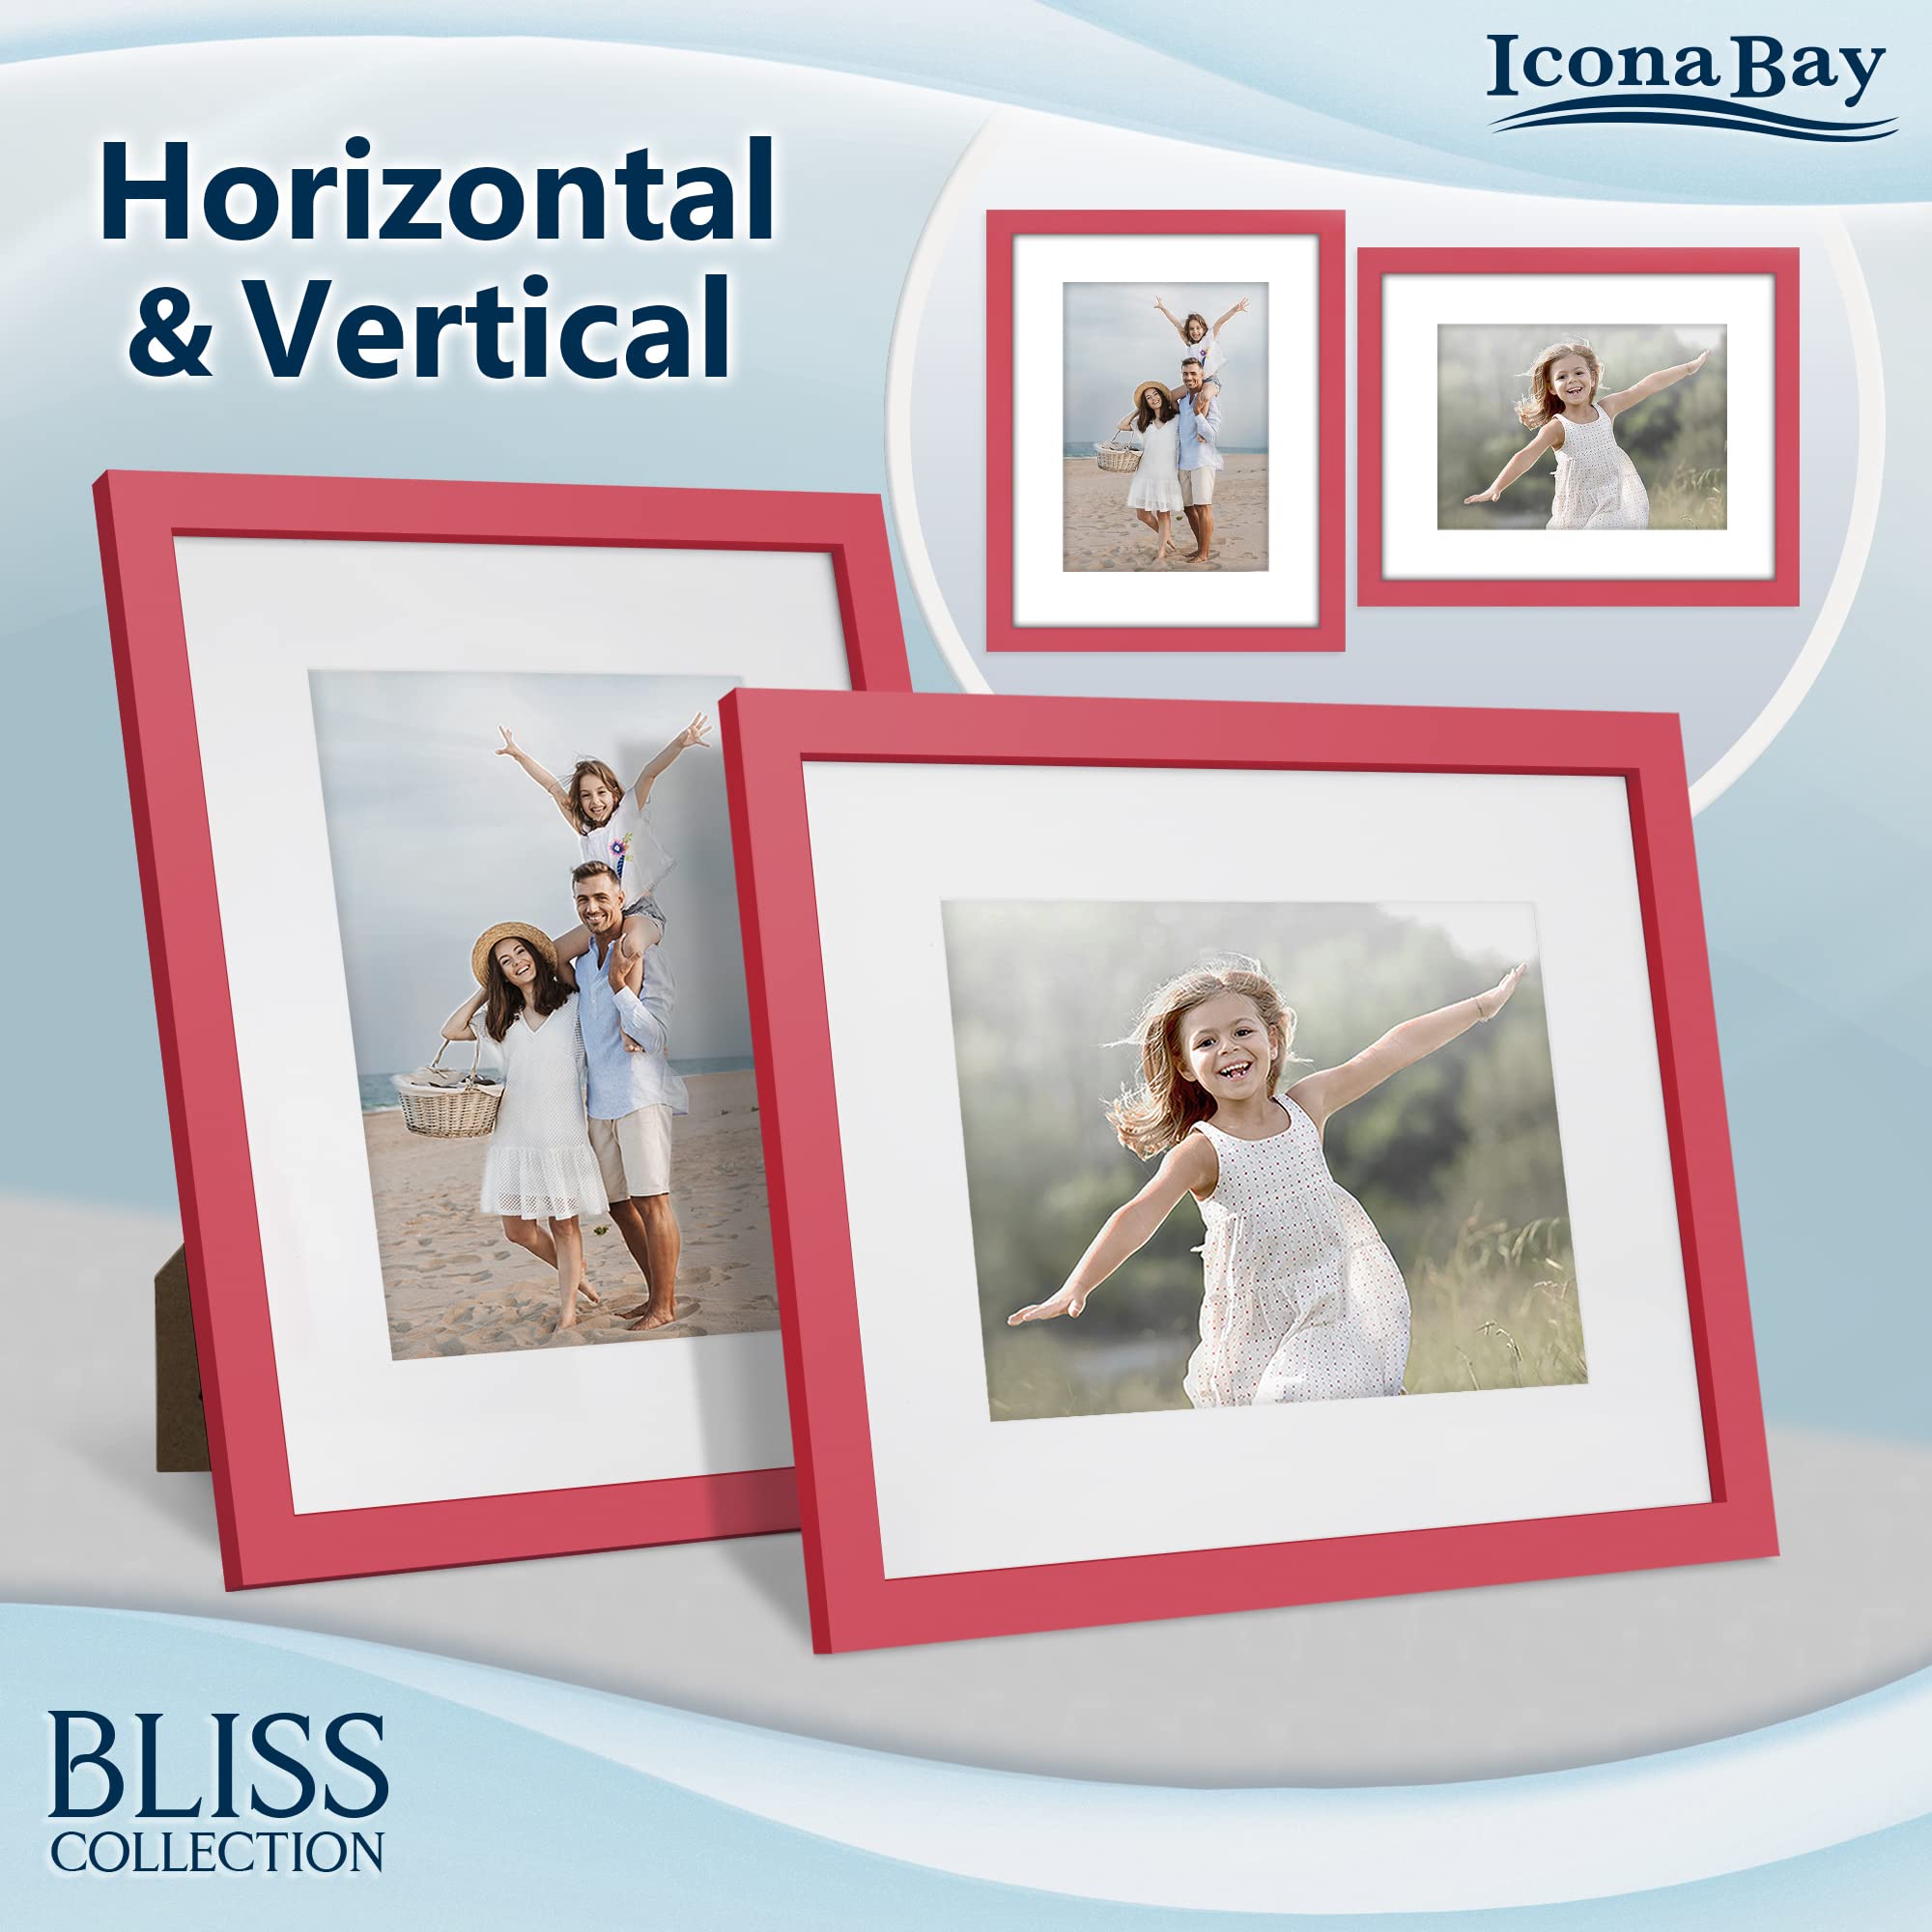 Icona Bay 8x10 Picture Frames with Removable Mat for 5x7 Photos (Red, 5 Pack), Modern Style Wood Composite Frames, Table Top or Wall Mount, Bliss Collection